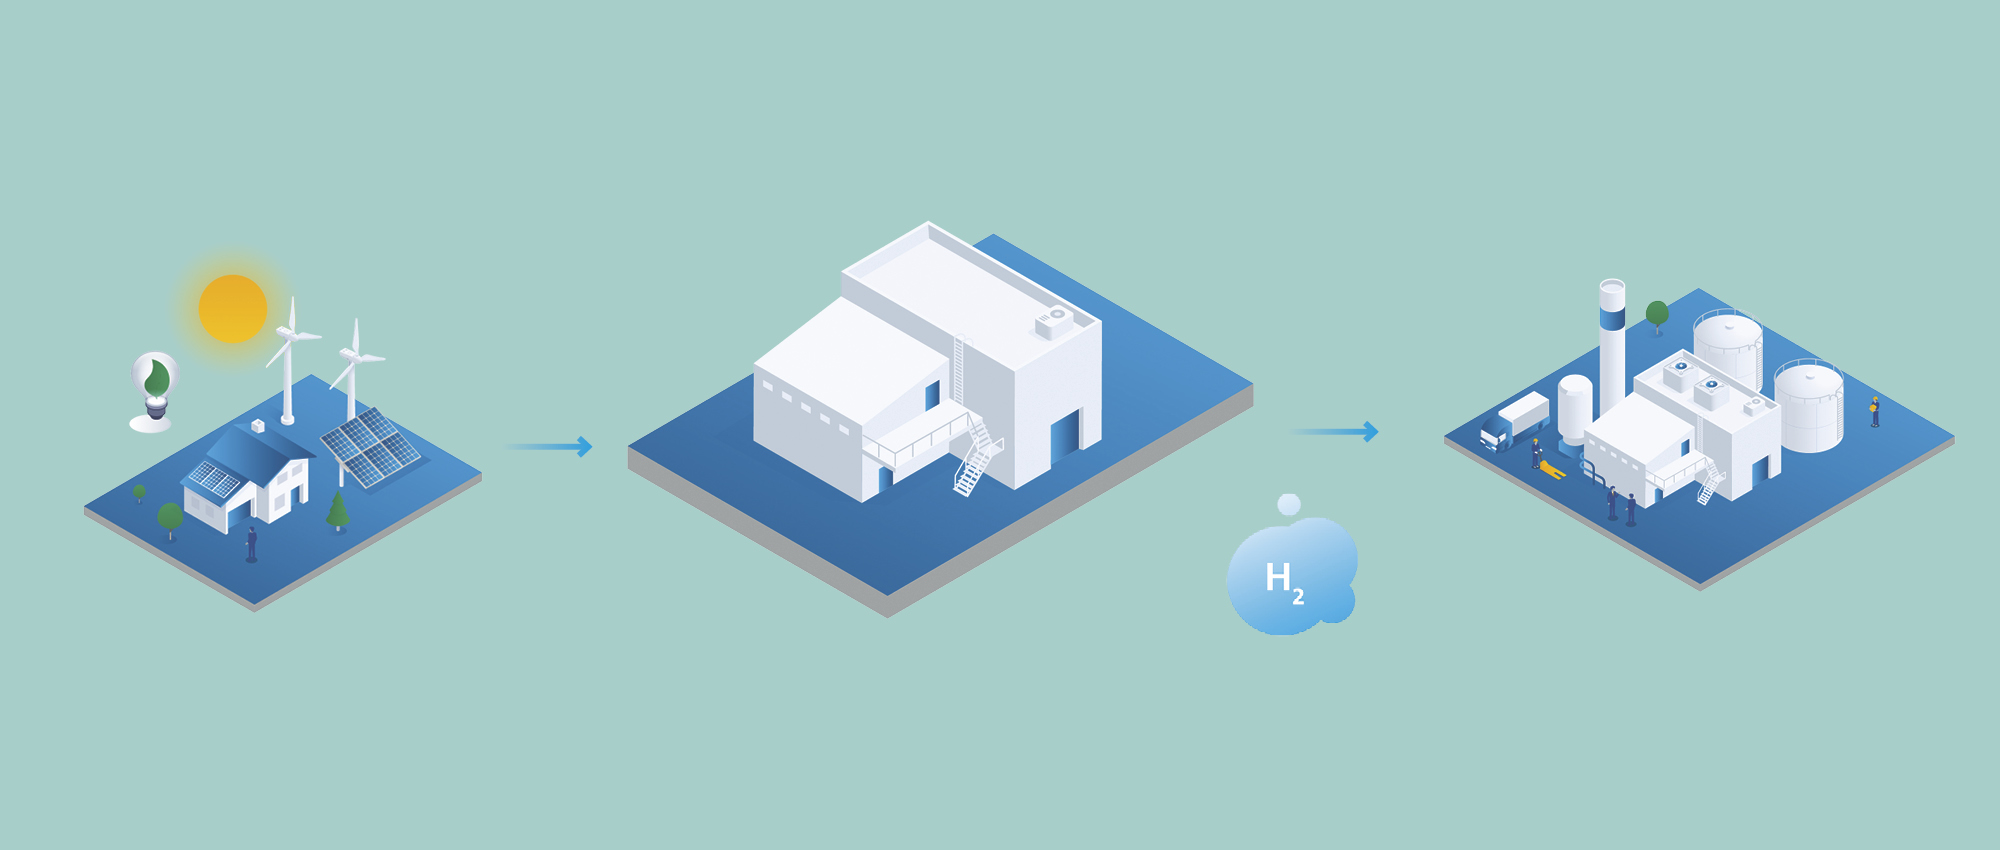 Illustration of a wind turbine on the left, an electrolysis center in the middle, and a factory on the right.